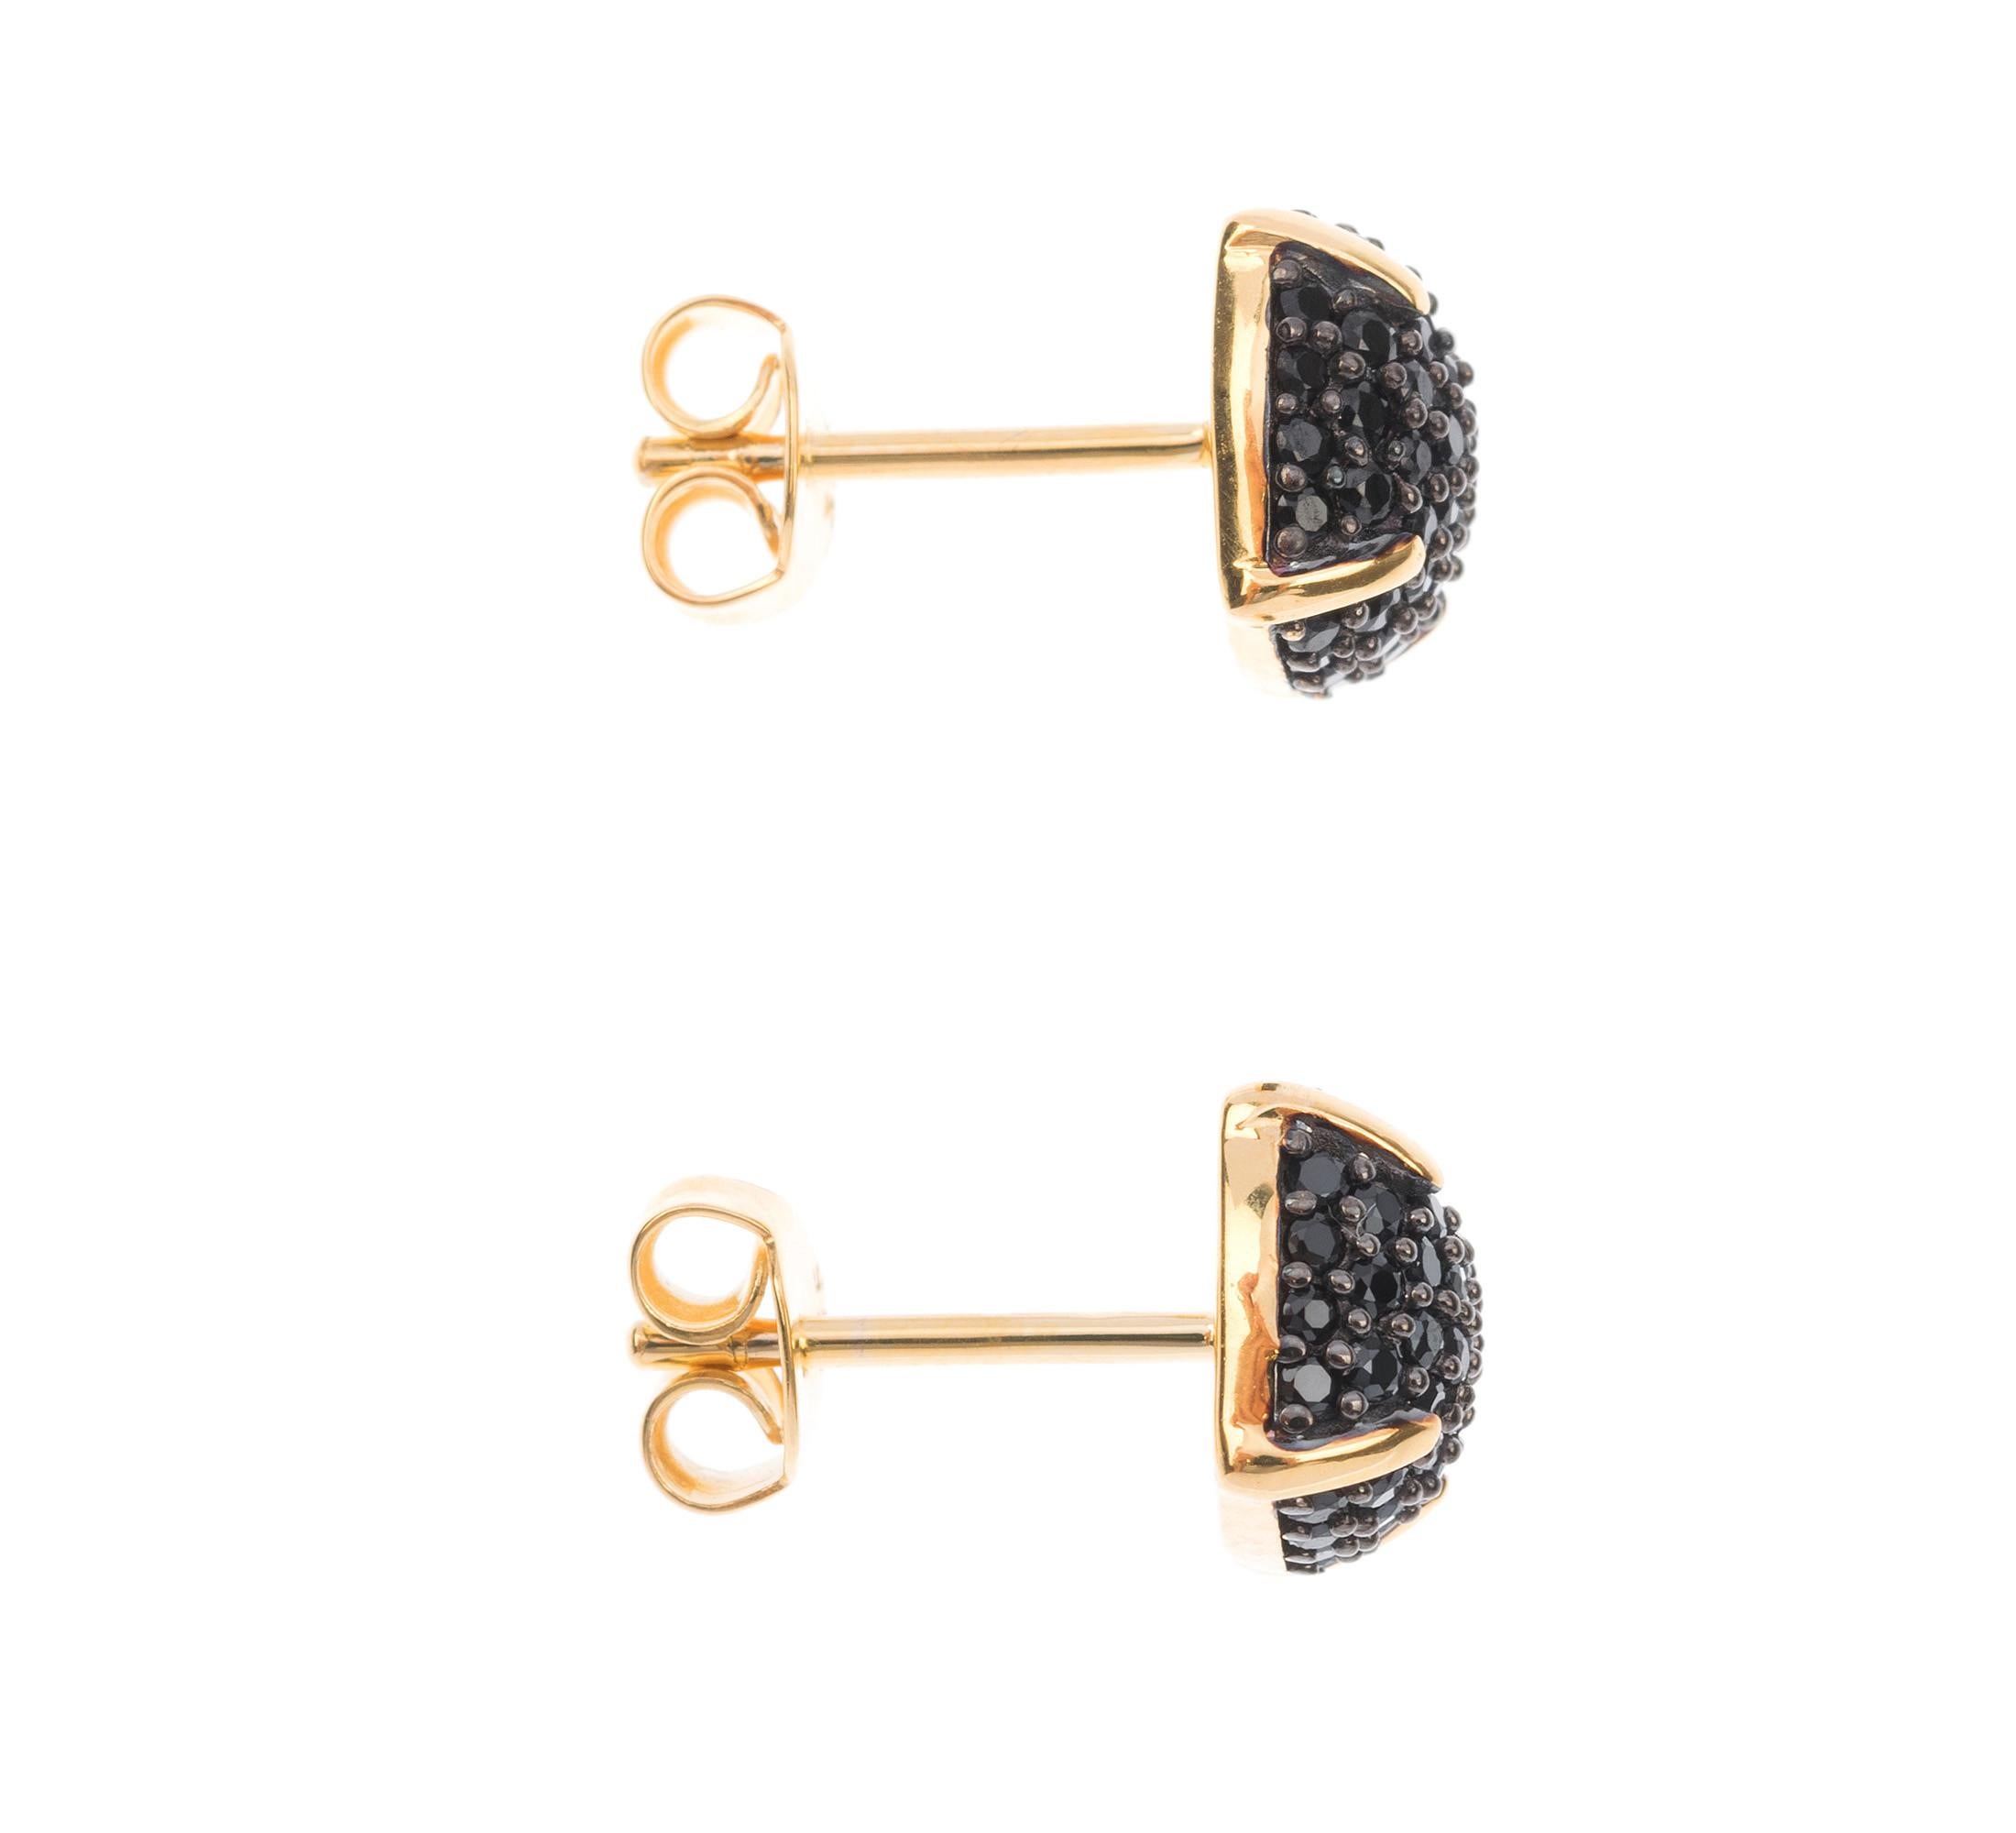 These fabulous pair limited edition earrings, each designed as a cluster of black spinels, sittings beautifully within the yellow gold setting.

The trendy combination of black and gold creates, an elegant and fashion-forward finish... that is